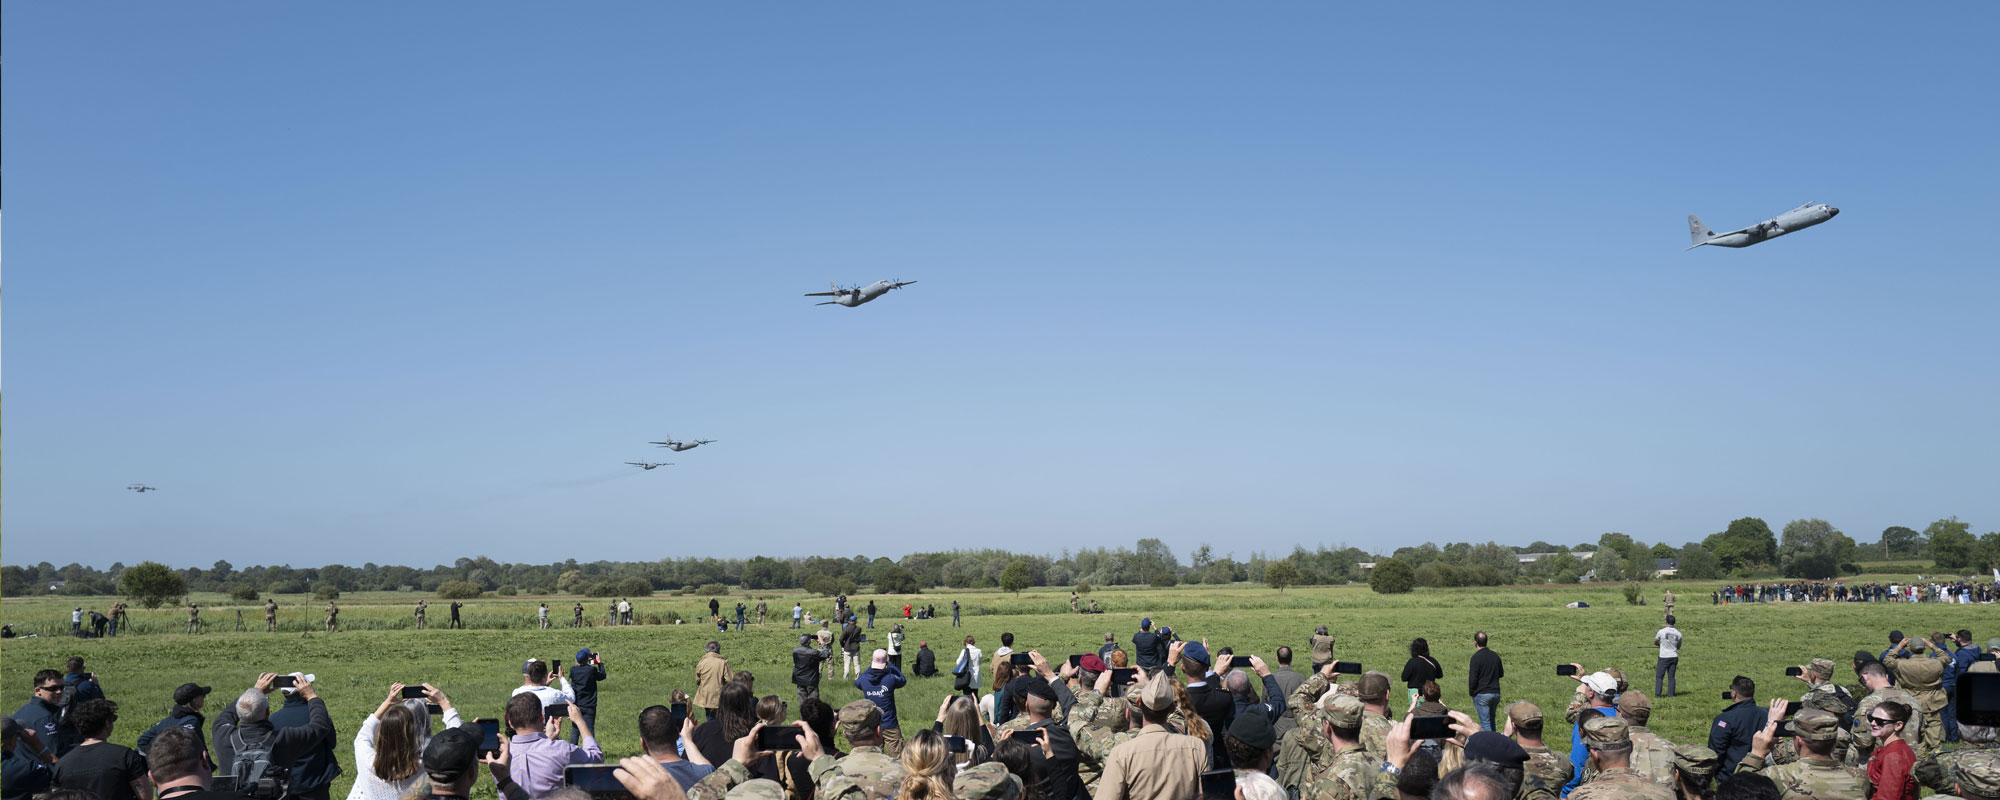 A crowd of people on a green grass airfield photograph five planes flying overhead